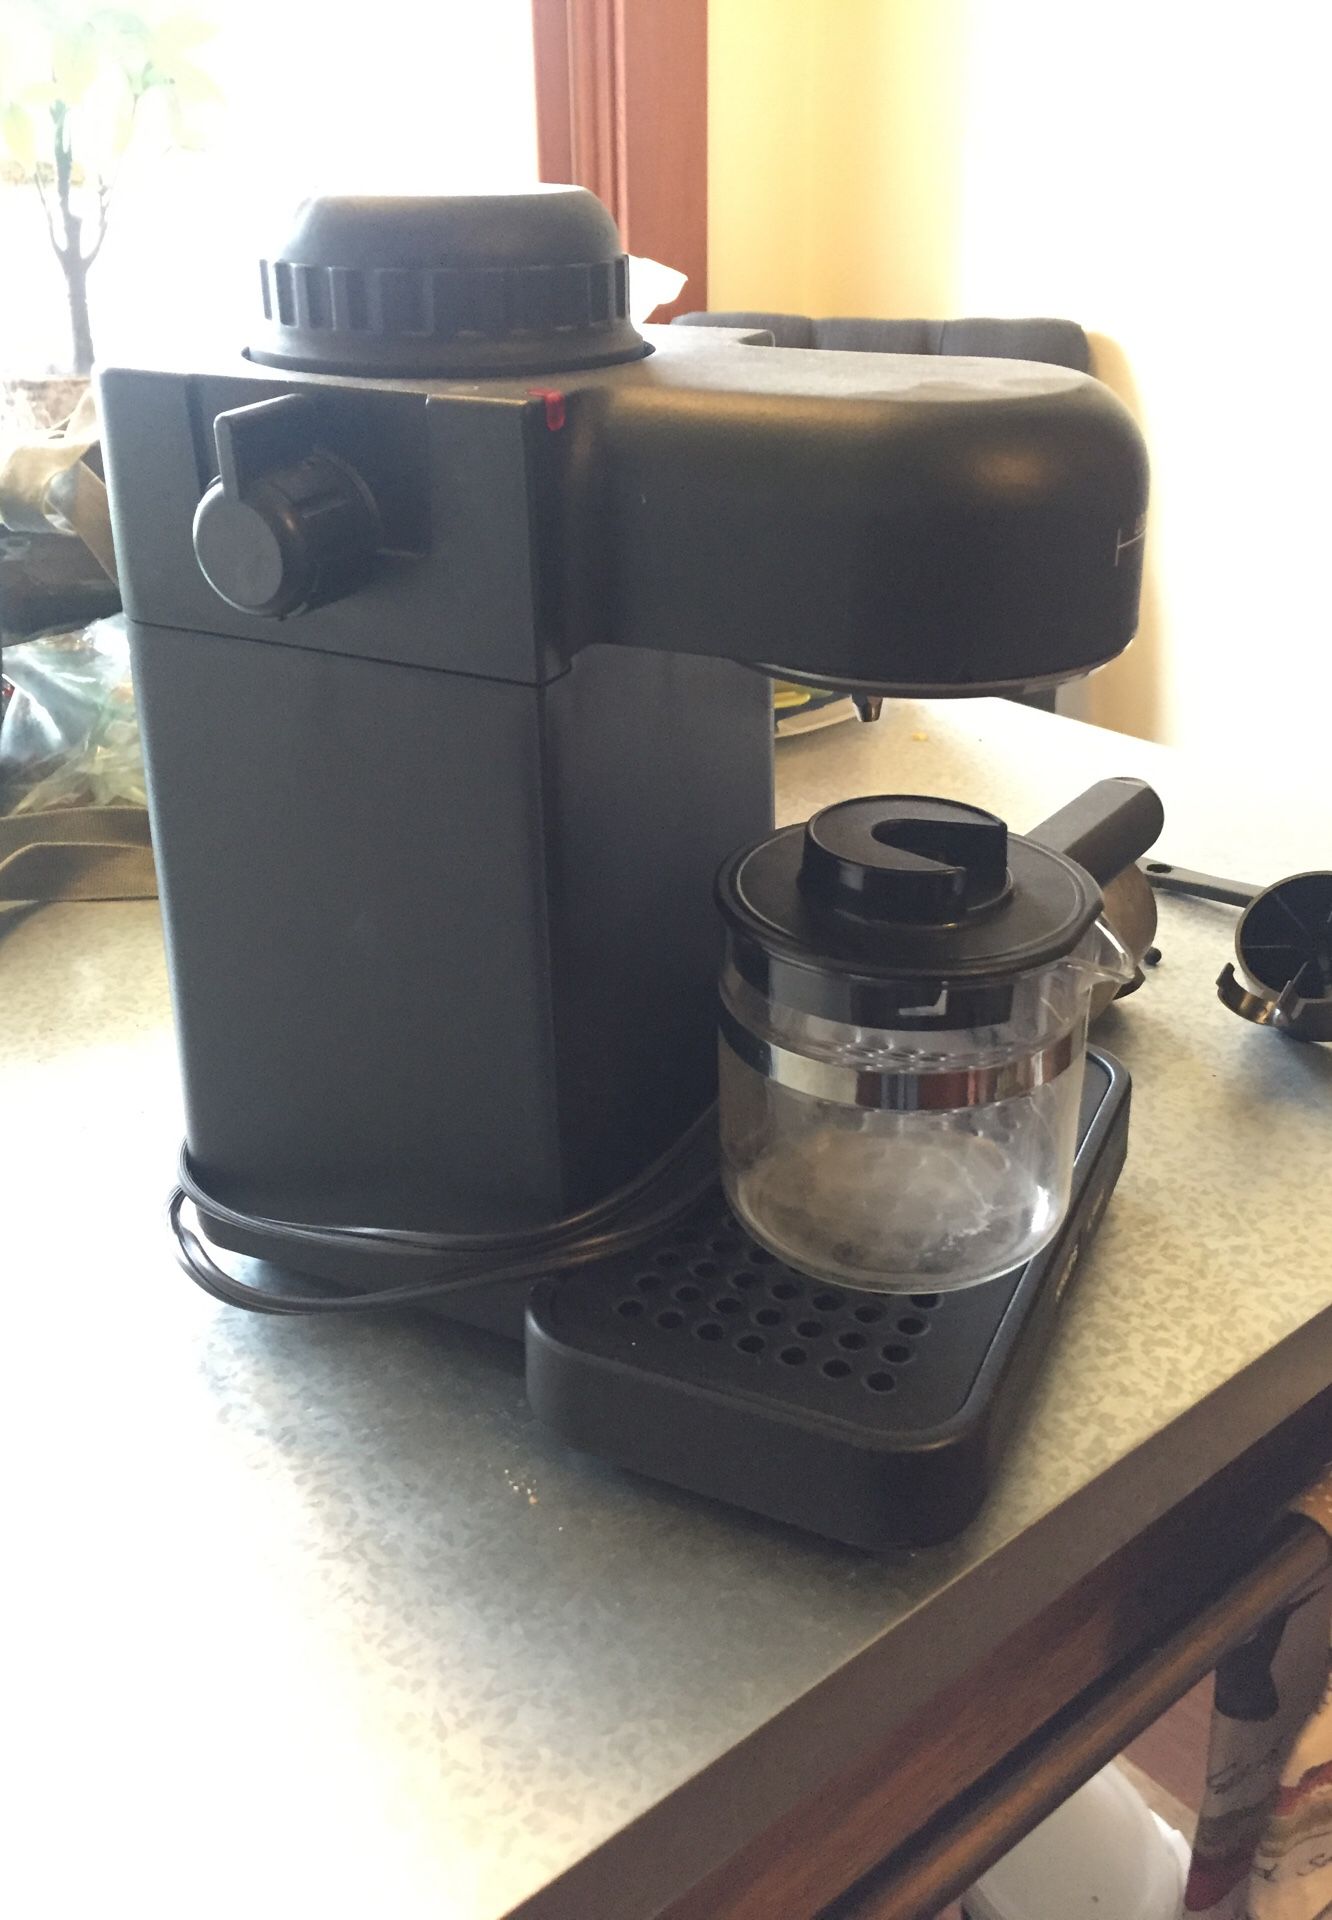 Krups espresso machine for Sale in Fort Myers, FL - OfferUp